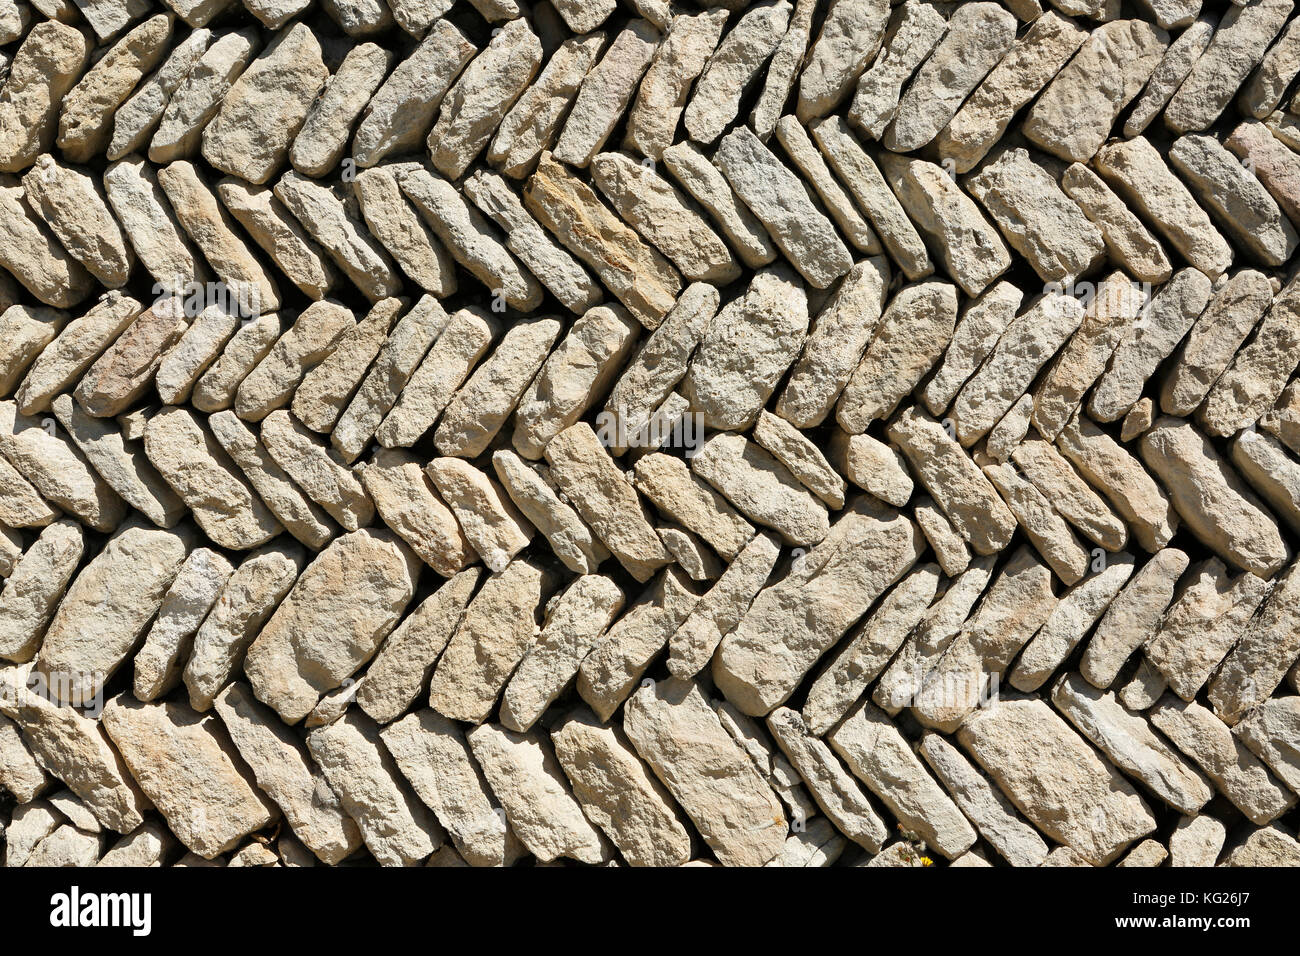 stone wall, ornament,close up, detail, Provance, France Stock Photo